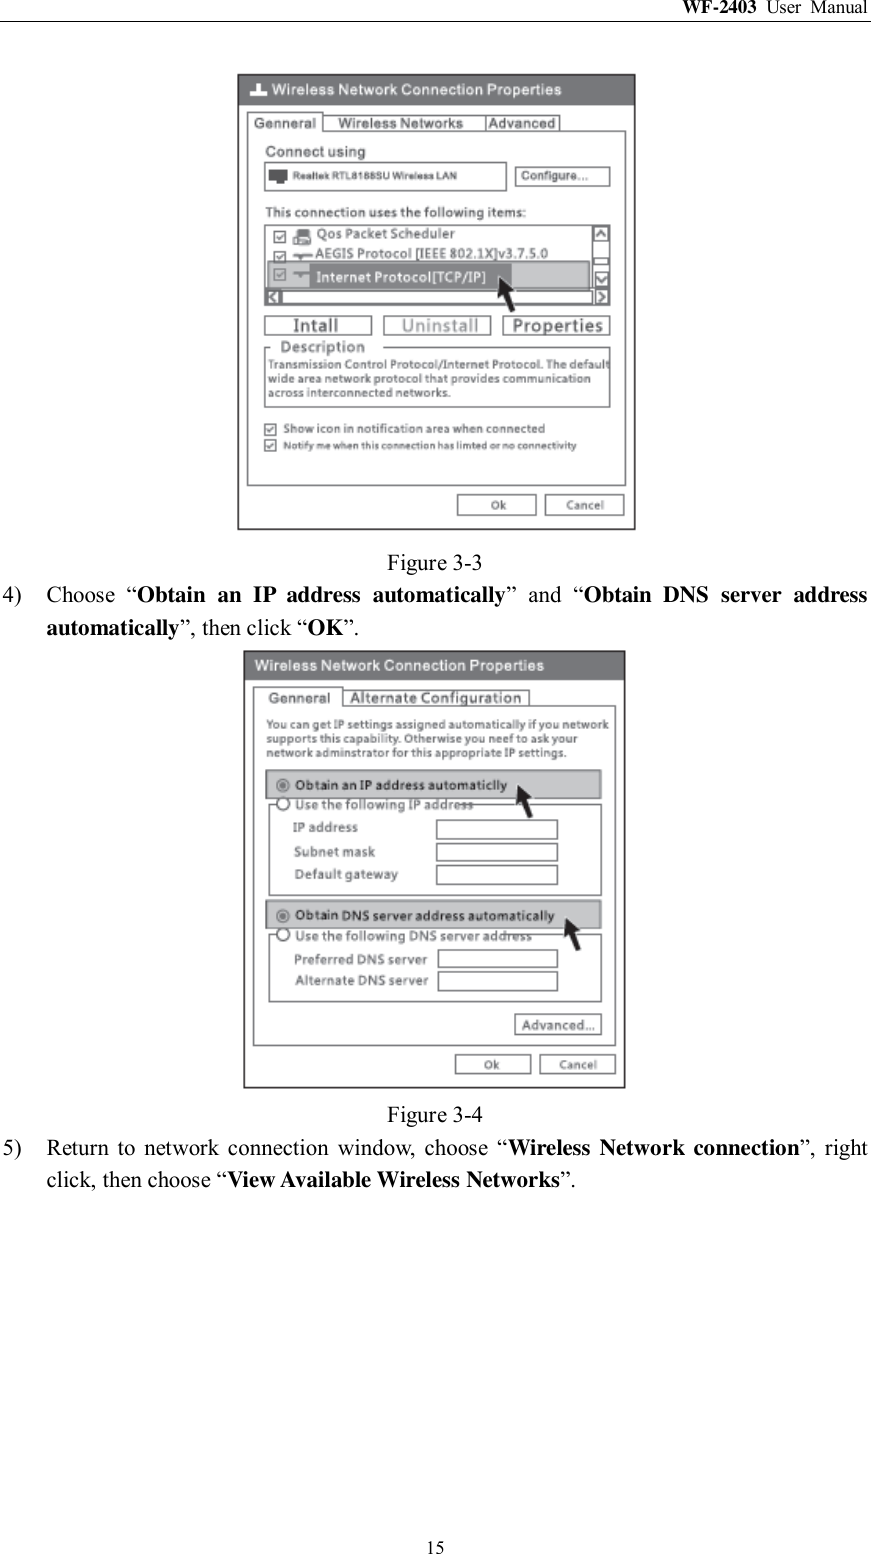 WF-2403  User  Manual  15  Figure 3-3 4) Choose  “Obtain  an  IP  address  automatically”  and  “Obtain  DNS  server  address automatically”, then click “OK”.  Figure 3-4 5) Return  to  network  connection  window,  choose  “Wireless Network connection”,  right click, then choose “View Available Wireless Networks”. 